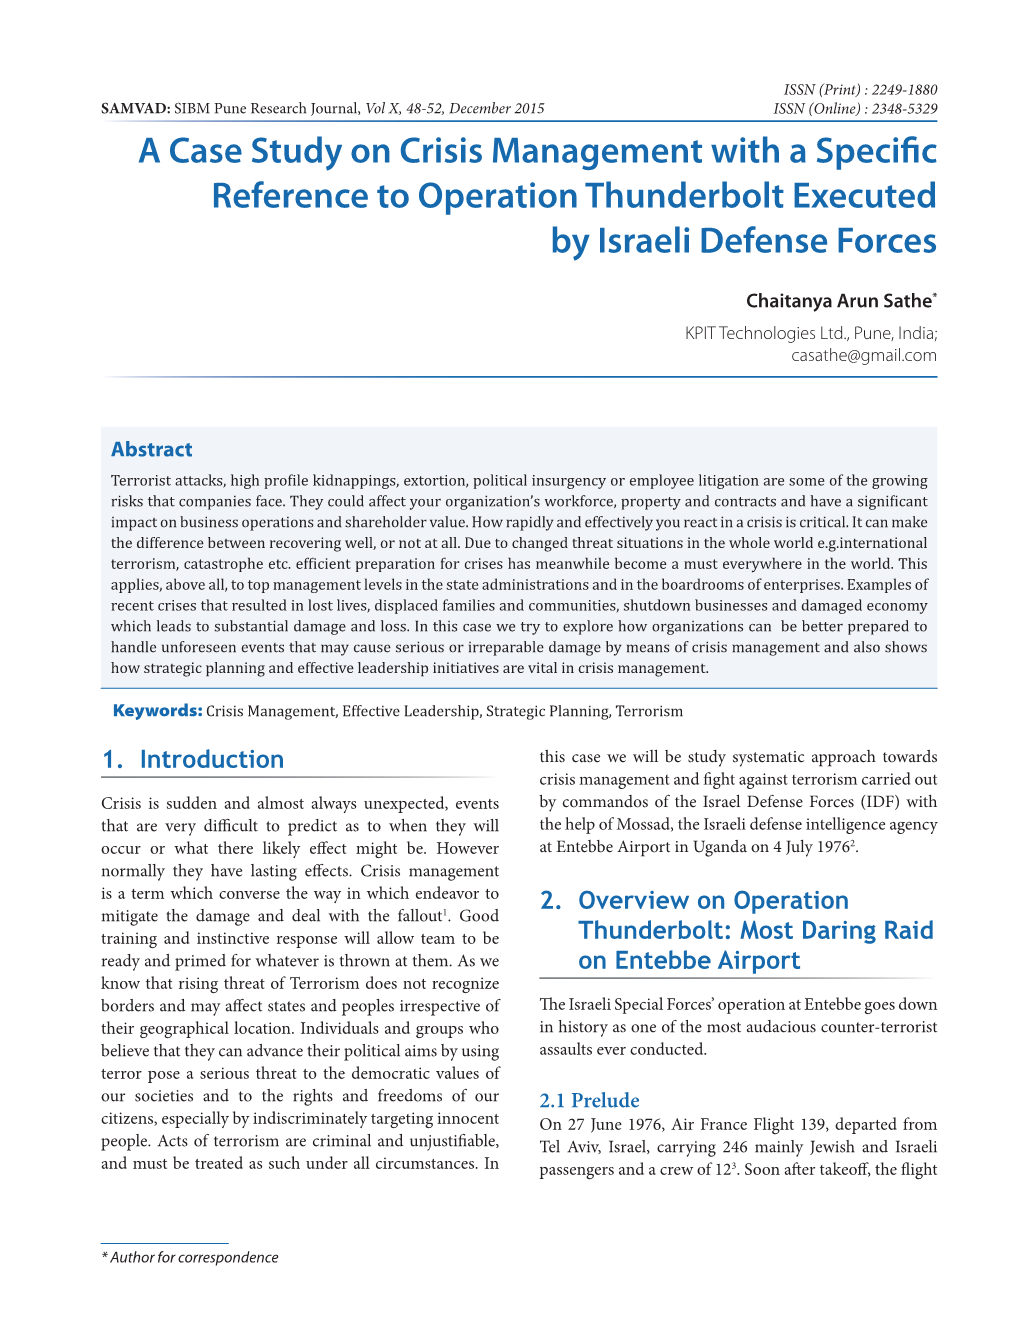 A Case Study on Crisis Management with a Specific Reference to Operation Thunderbolt Executed by Israeli Defense Forces